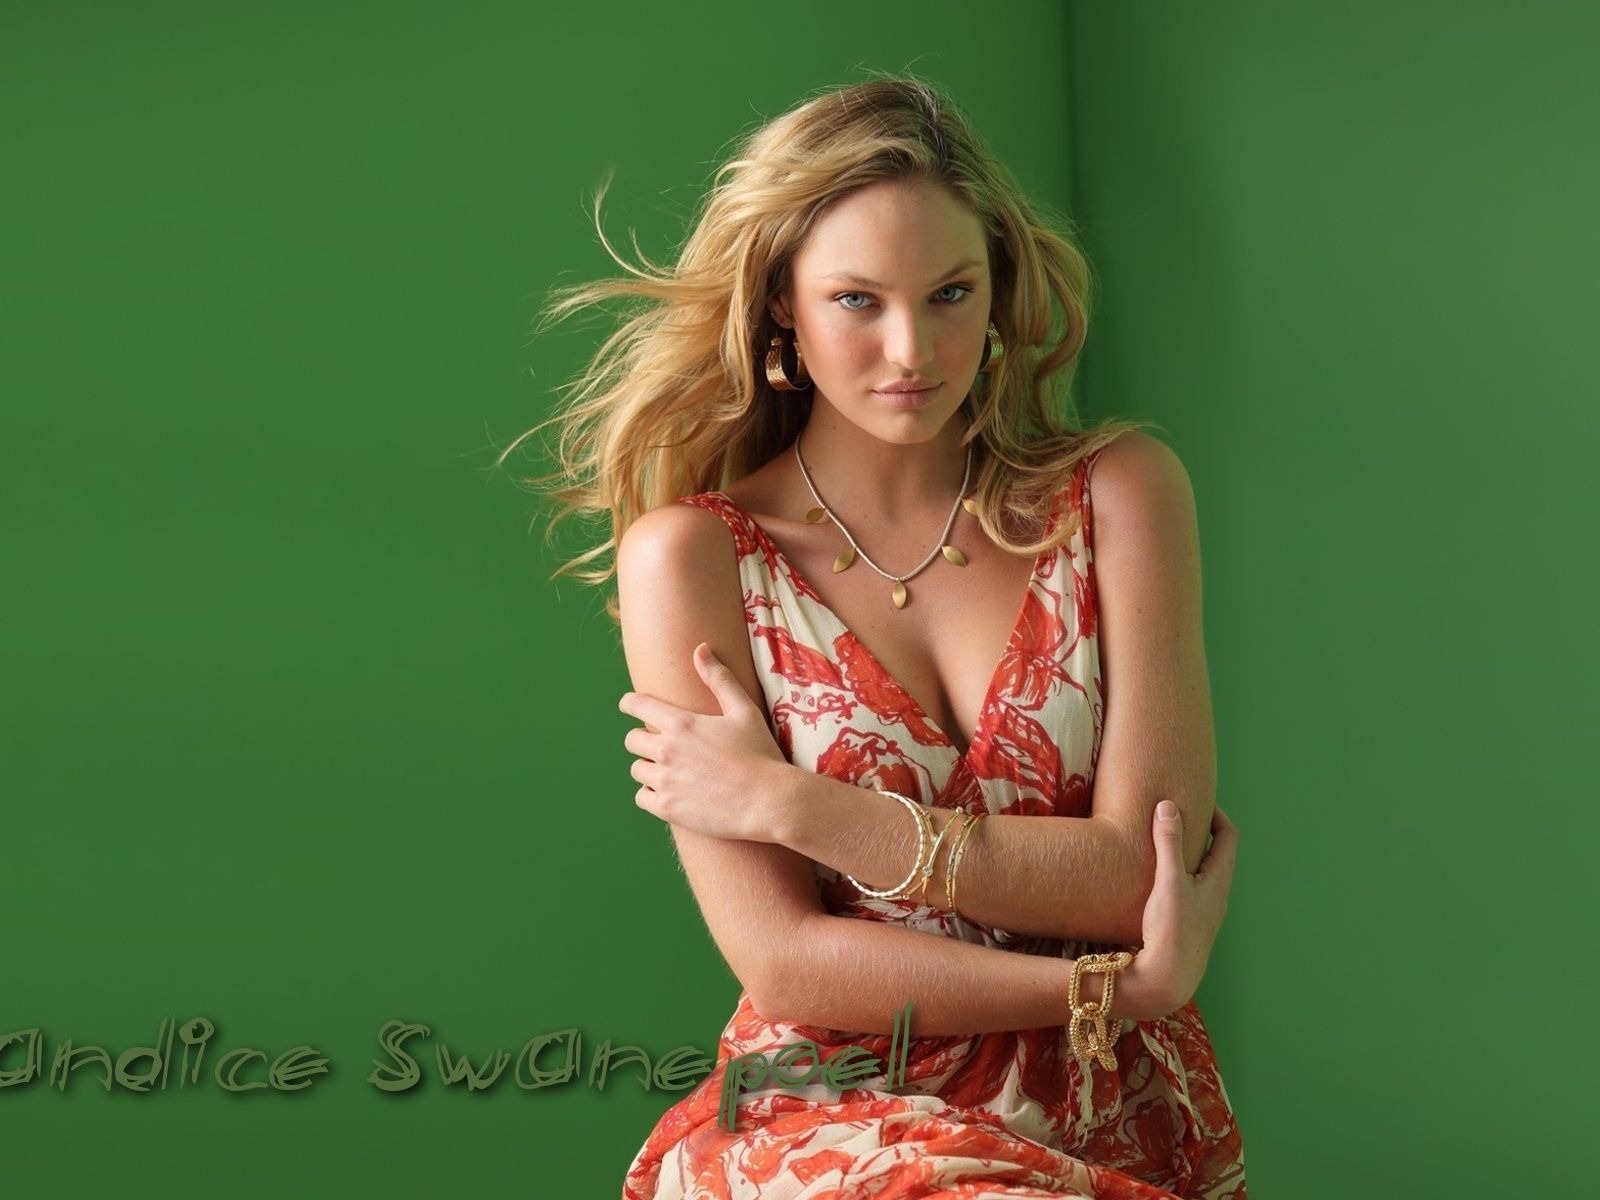 Candice Swanepoel #016 - 1600x1200 Wallpapers Pictures Photos Images